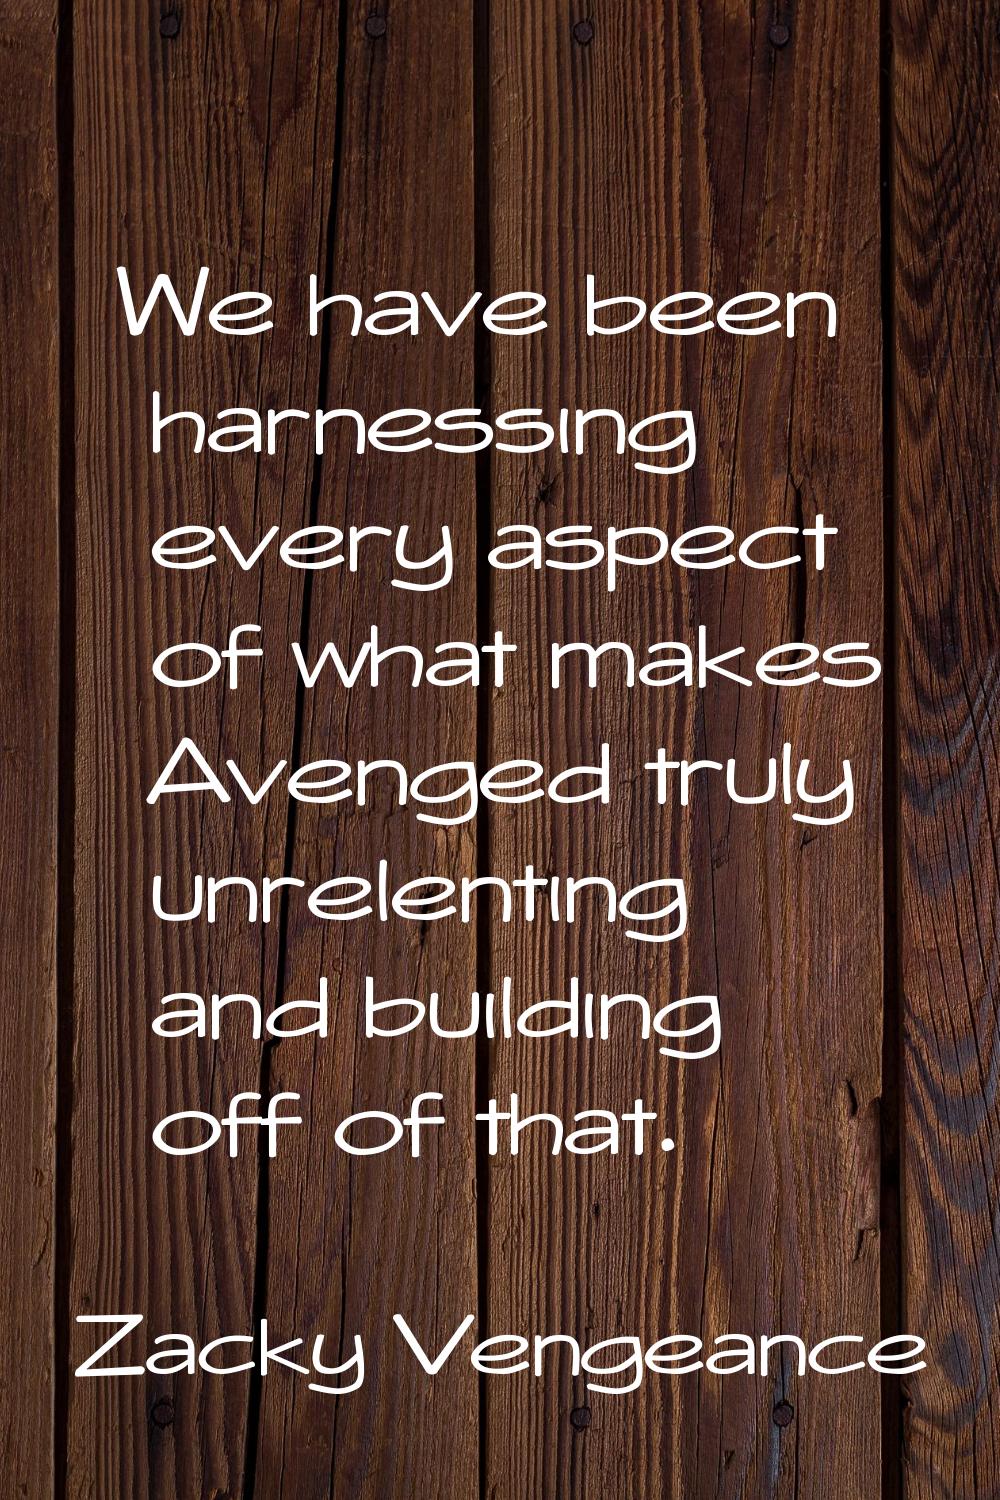 We have been harnessing every aspect of what makes Avenged truly unrelenting and building off of th